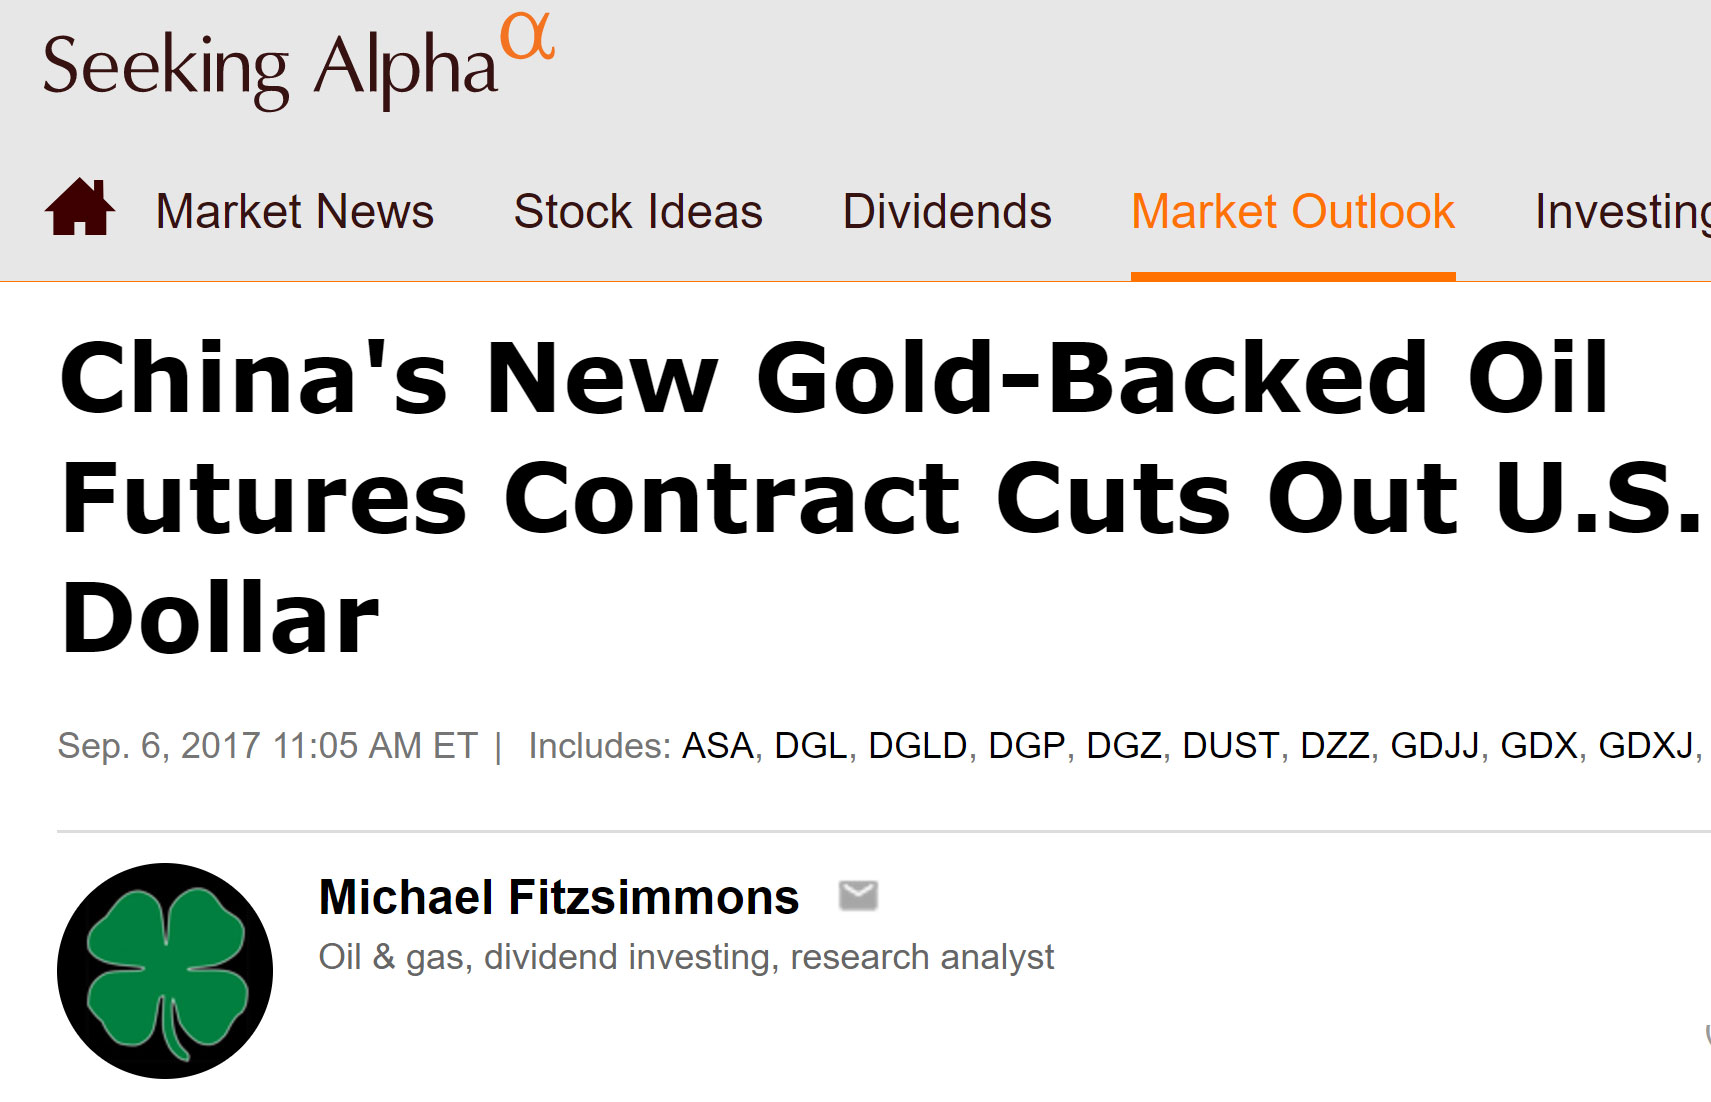 8-chinas-new-gold-backed-oil-futures-contract-cuts-out-us-dollar.jpg